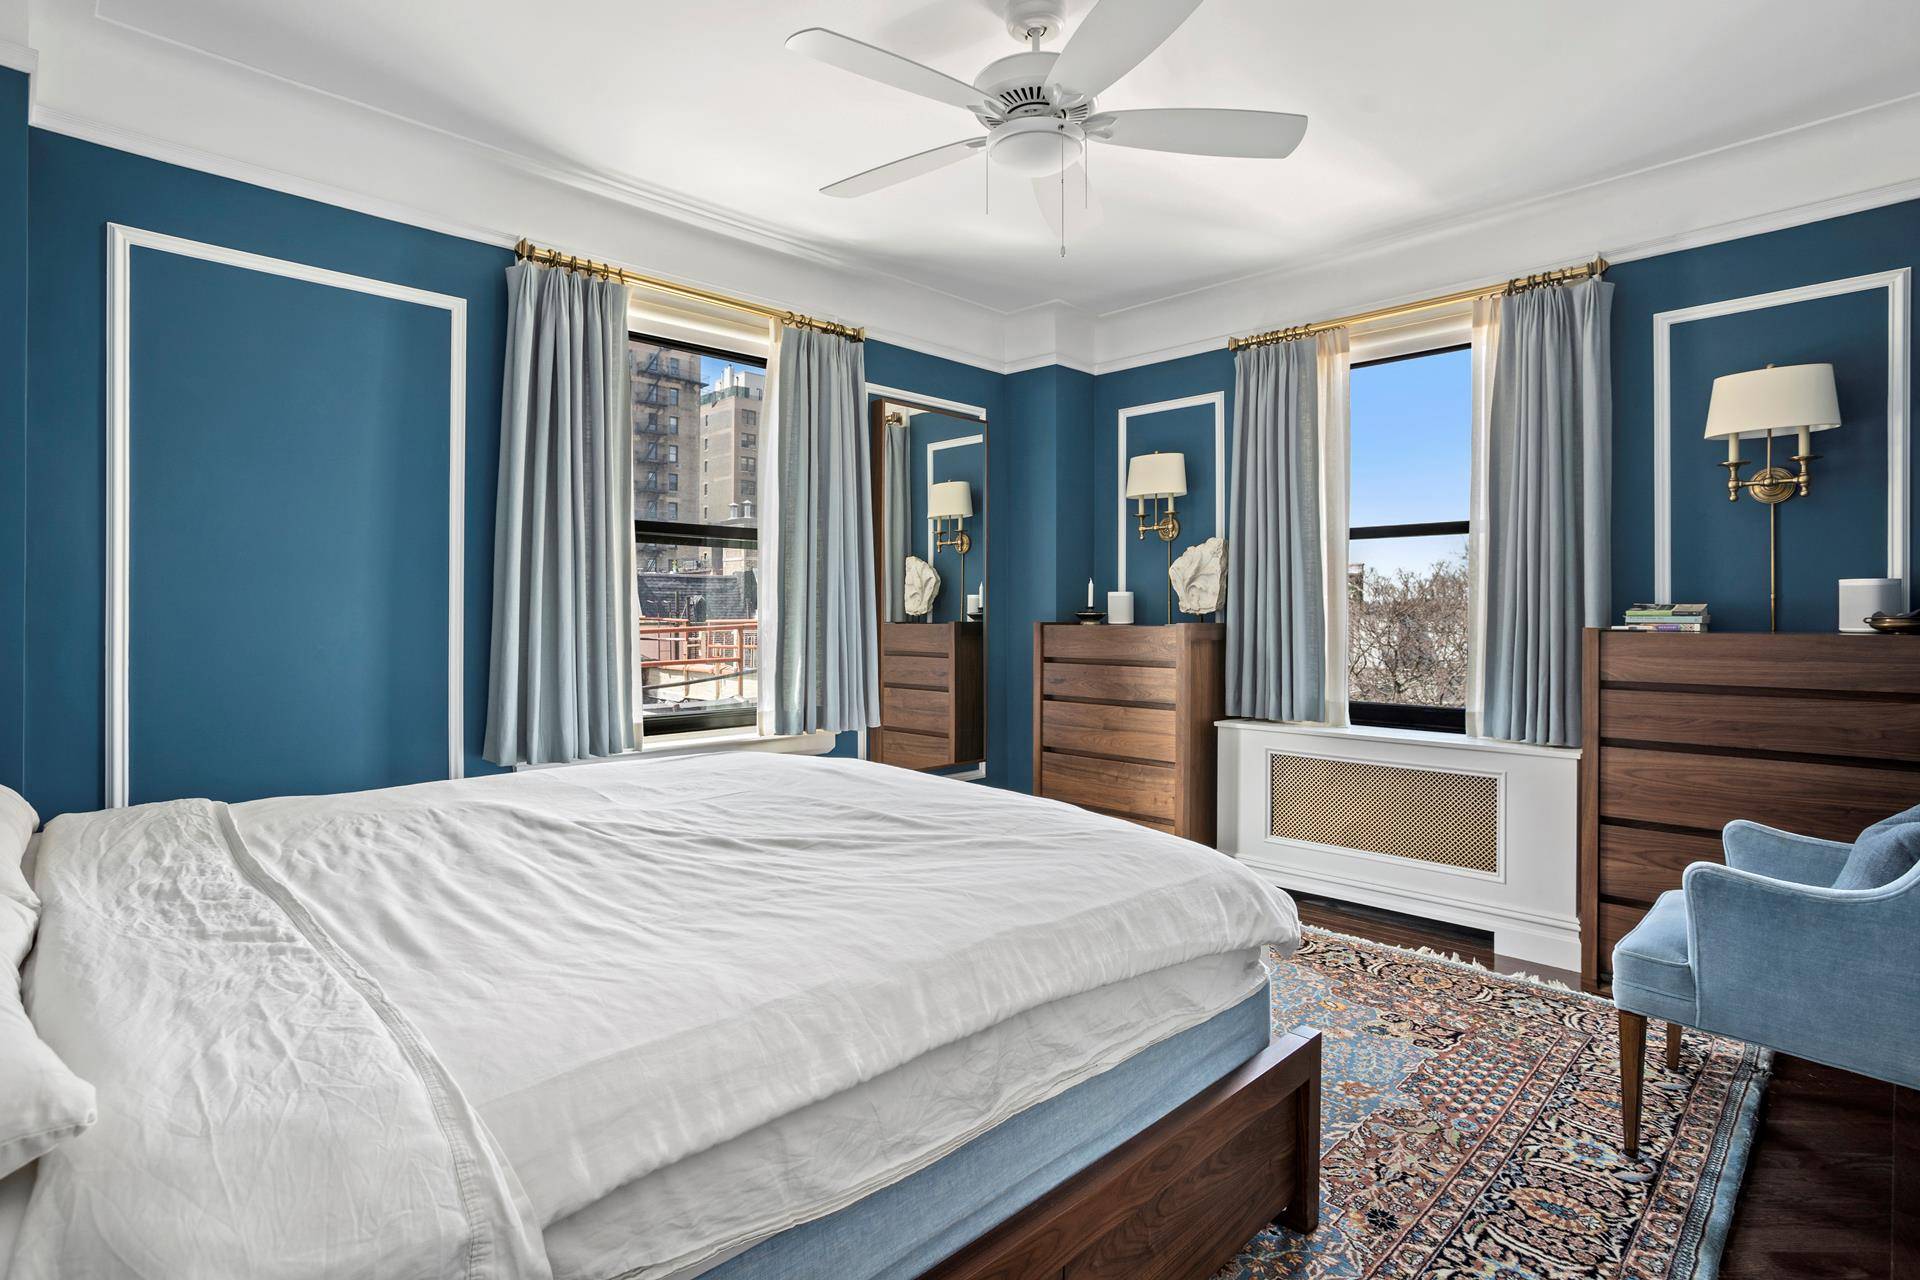 Designed by renowned architect Rosario Candela, 300 West 108th Street is a full service co operative built in 1924, with a 24 hour doorman and resident superintendent.